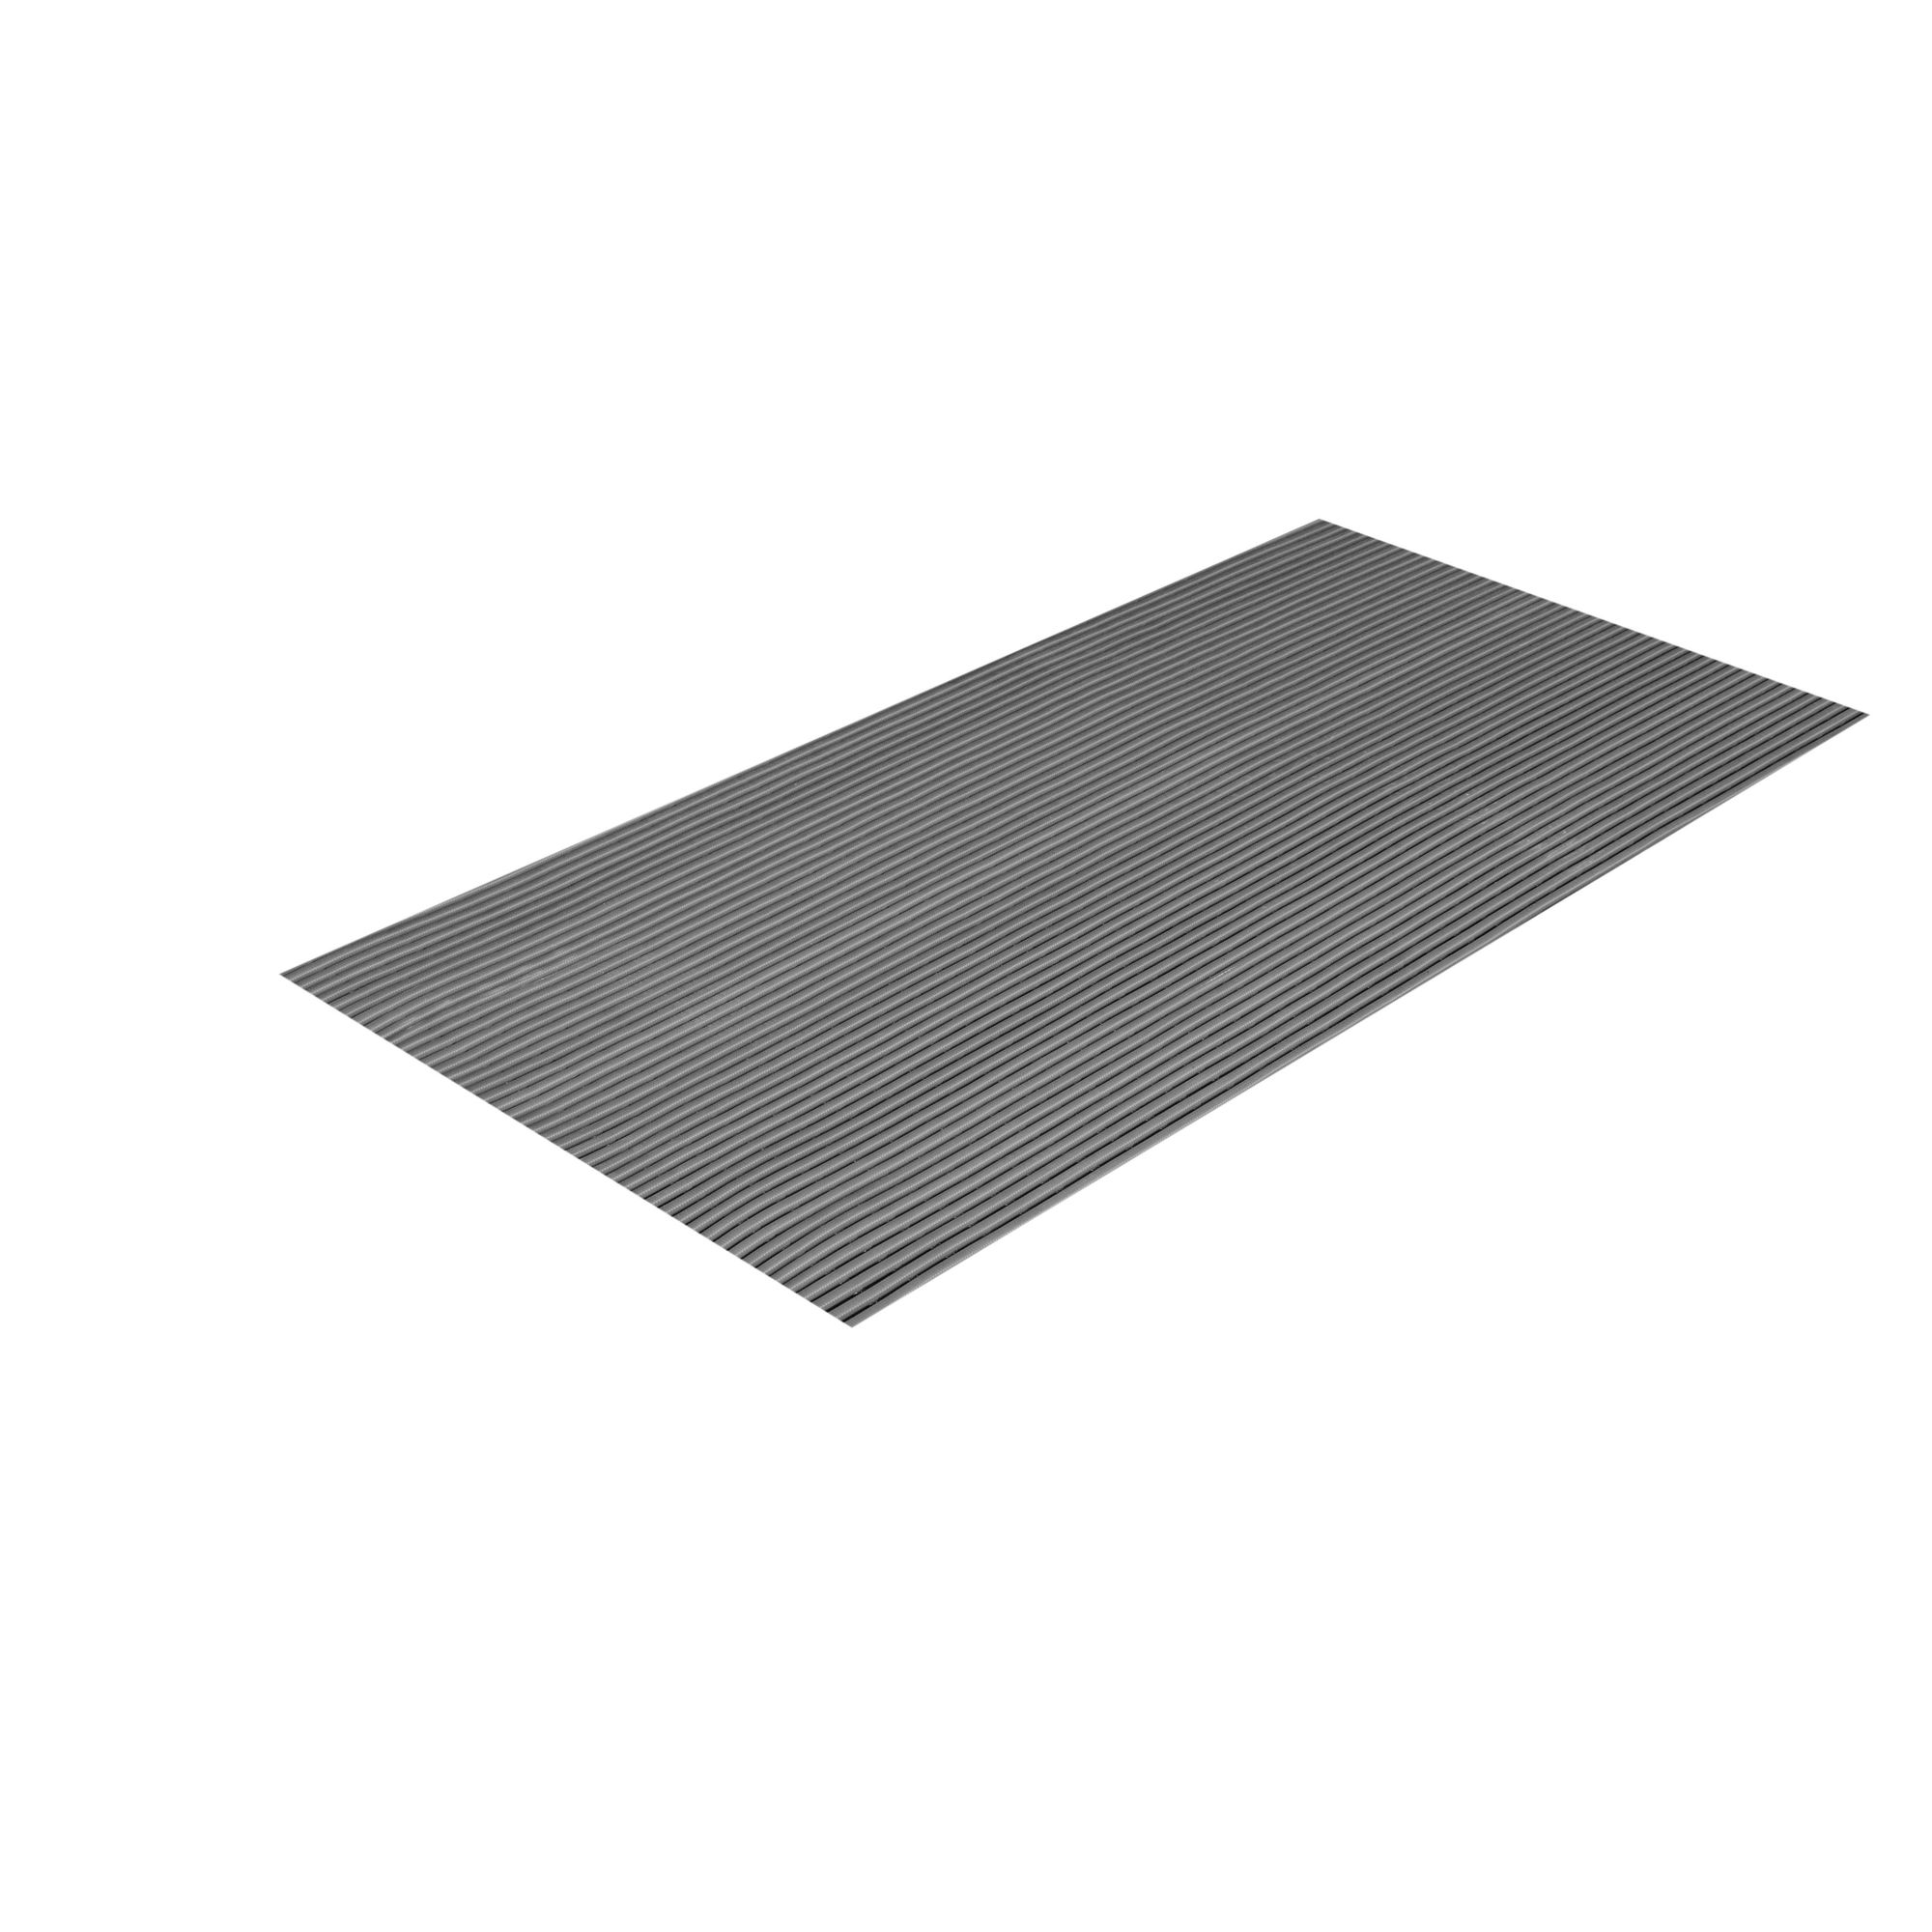 Crown Matting Technologies, Sani-Tred 2ft.x40ft. Charcoal, Width 24 in, Length 480 in, Thickness 15/32 in, Model HVR0024CH